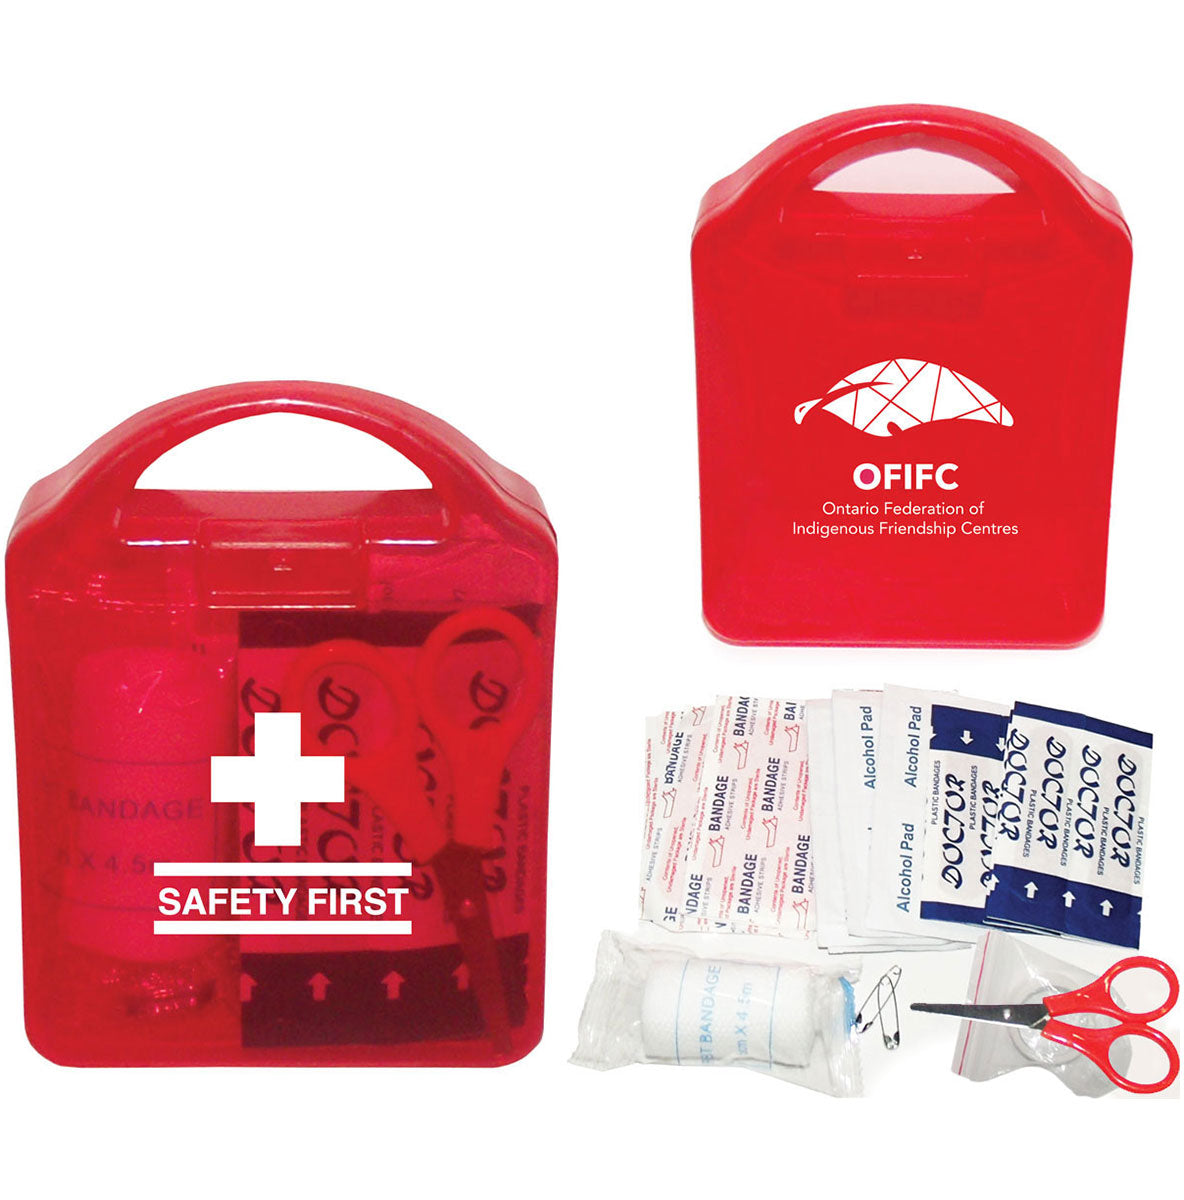 MINI SAFETY TRAVEL FIRST AID BOX - promopig